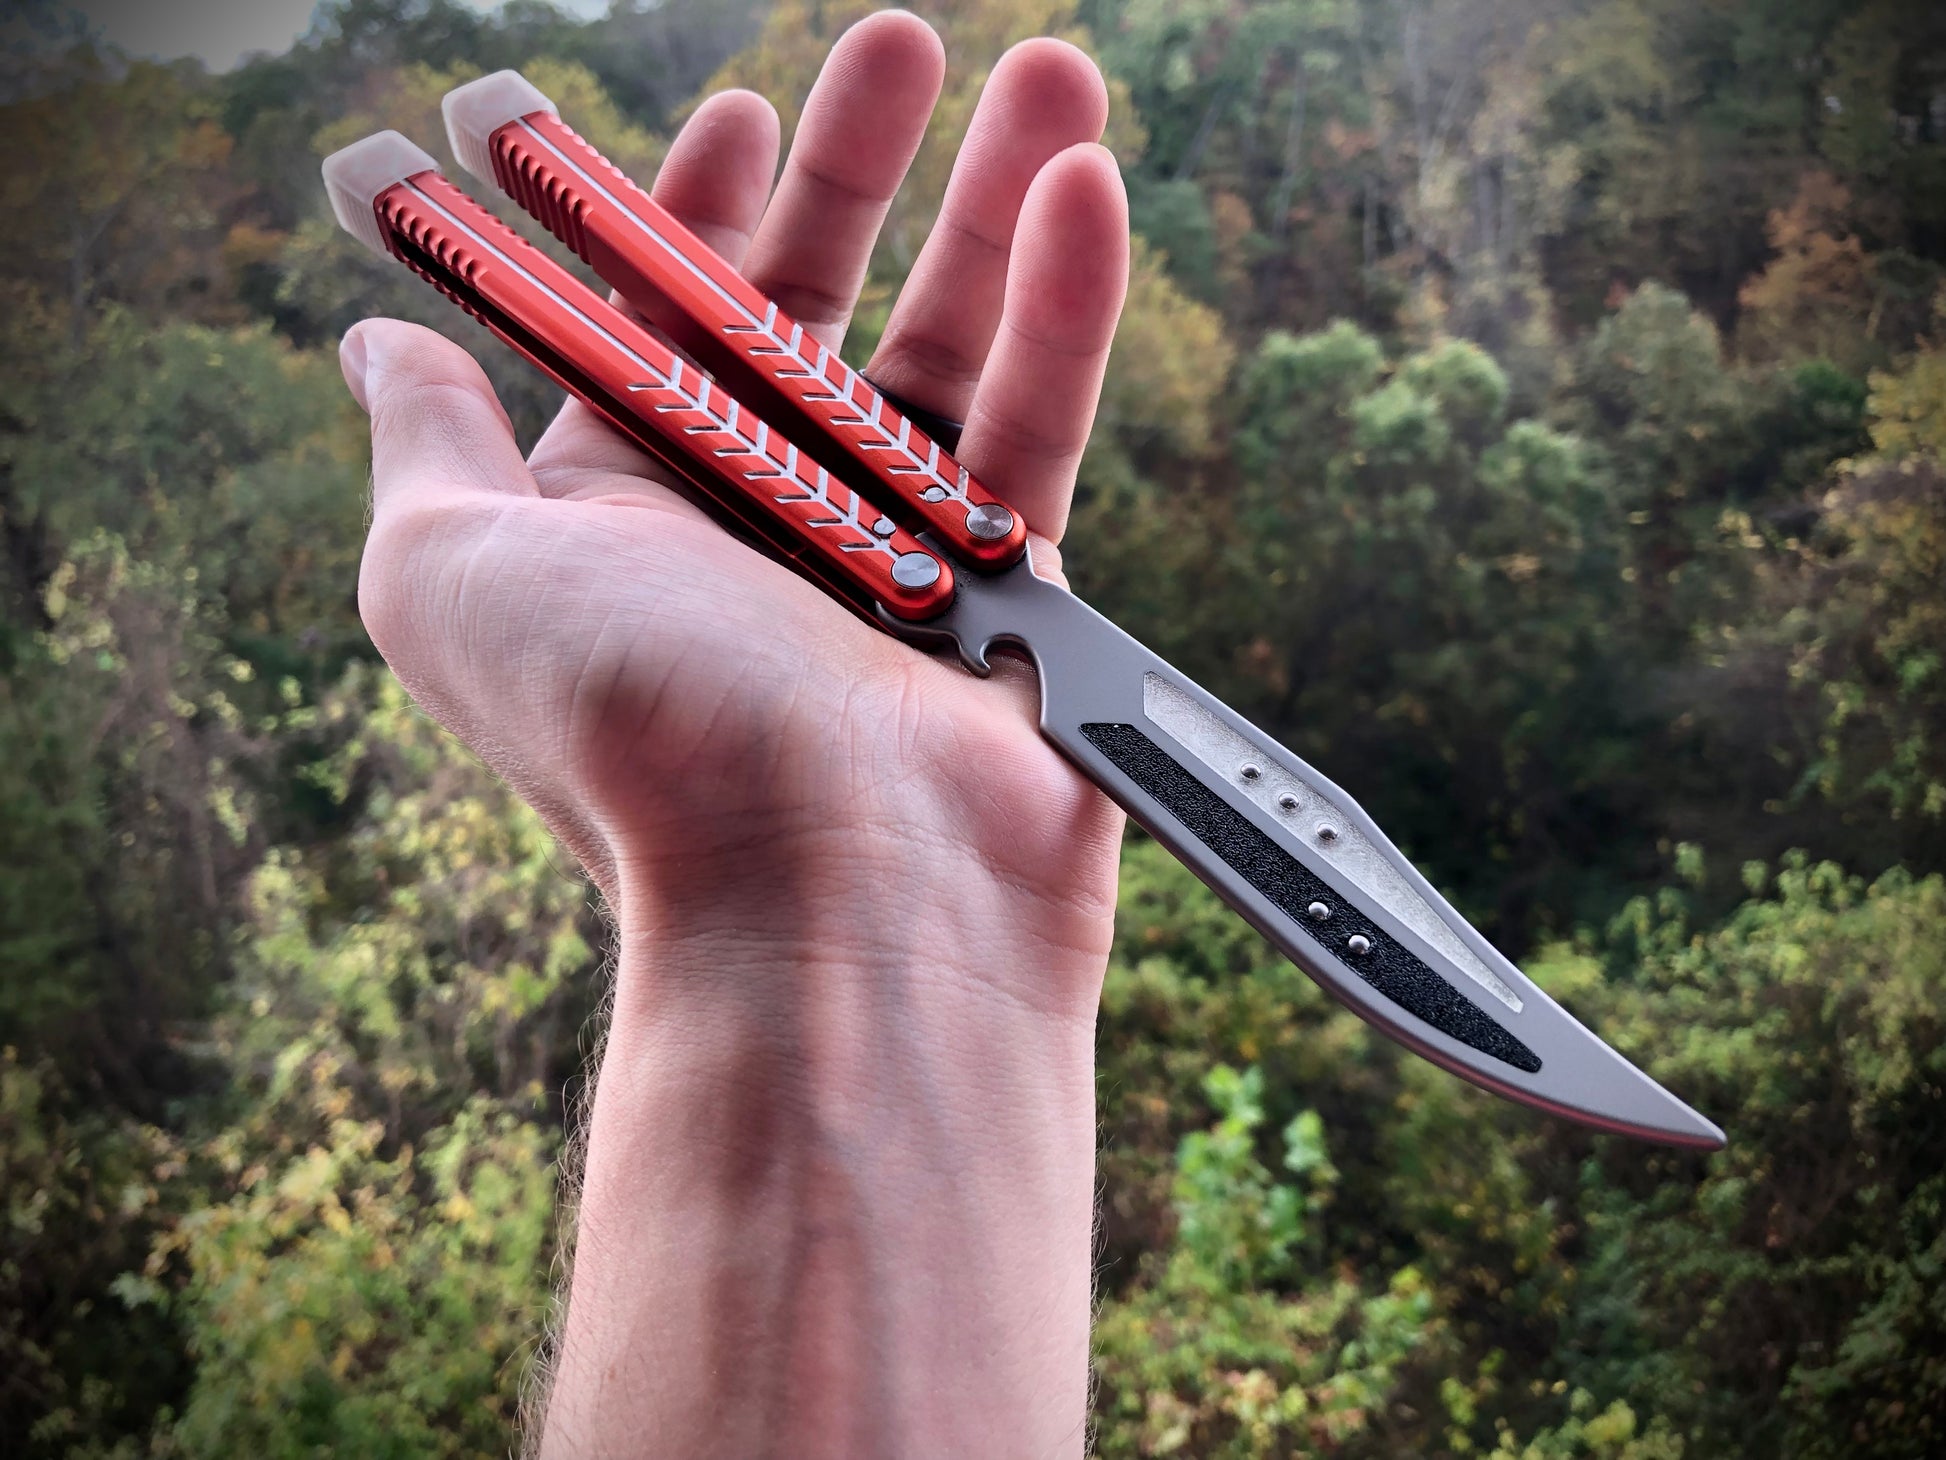 Adjust the balance of your Nabalis Vulp balisong trainer (designed by Will Hirsch) with this custom-made Zippy blade insert.